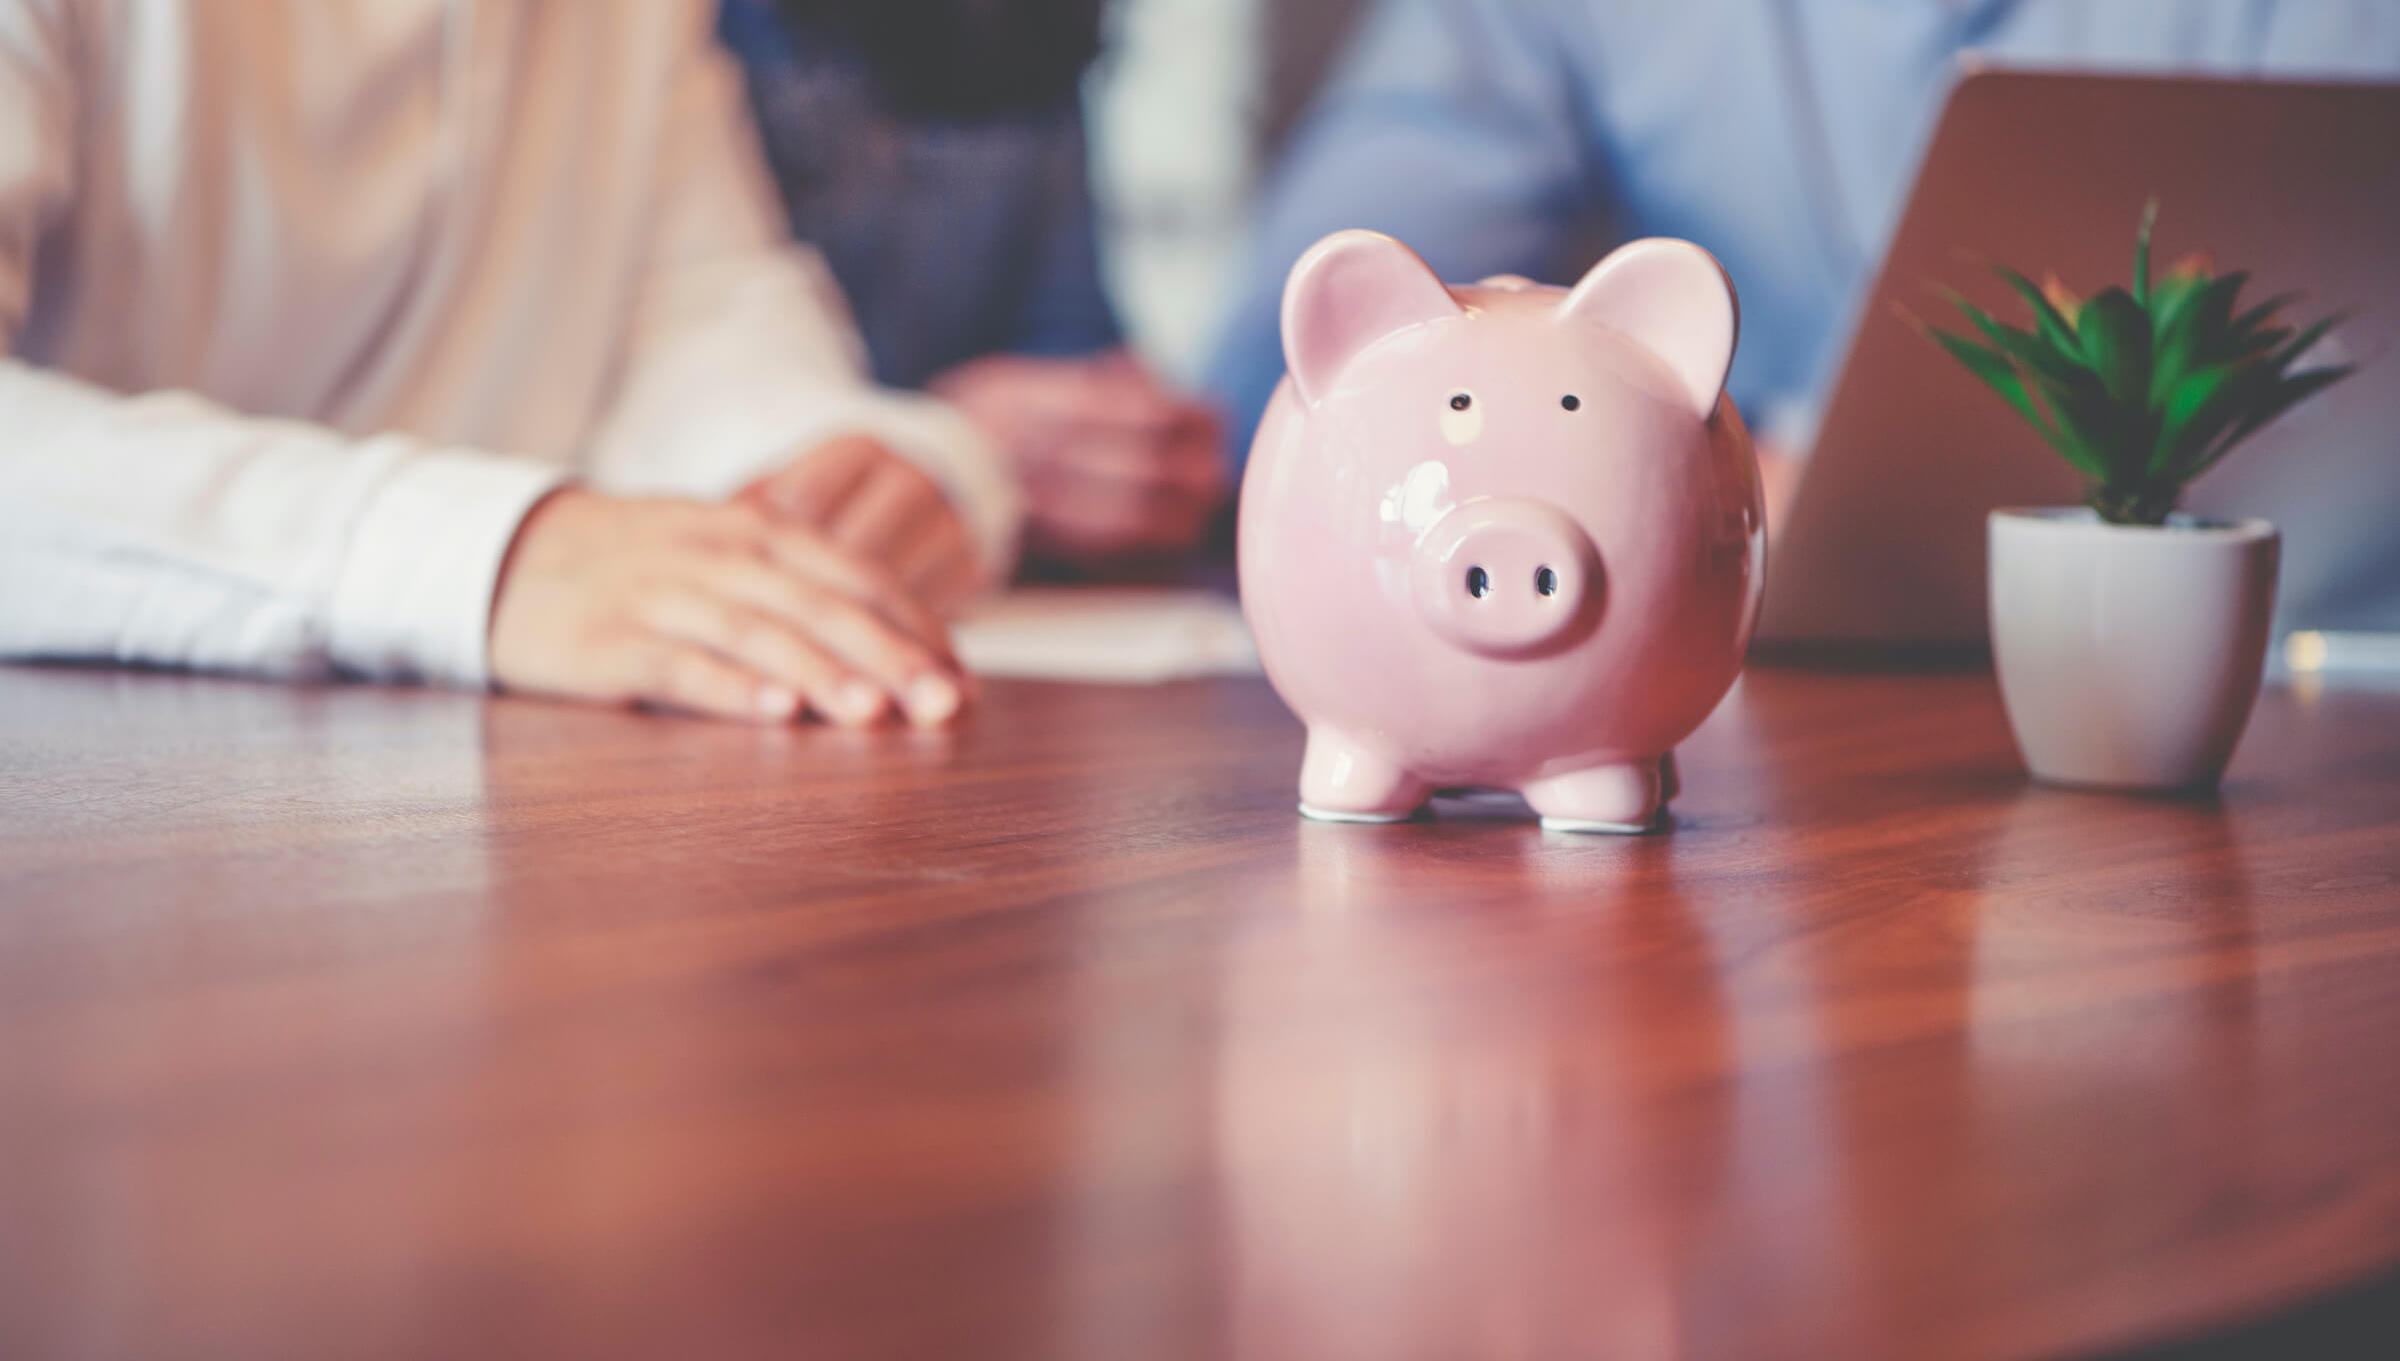 piggy bank on table as people discuss business loan